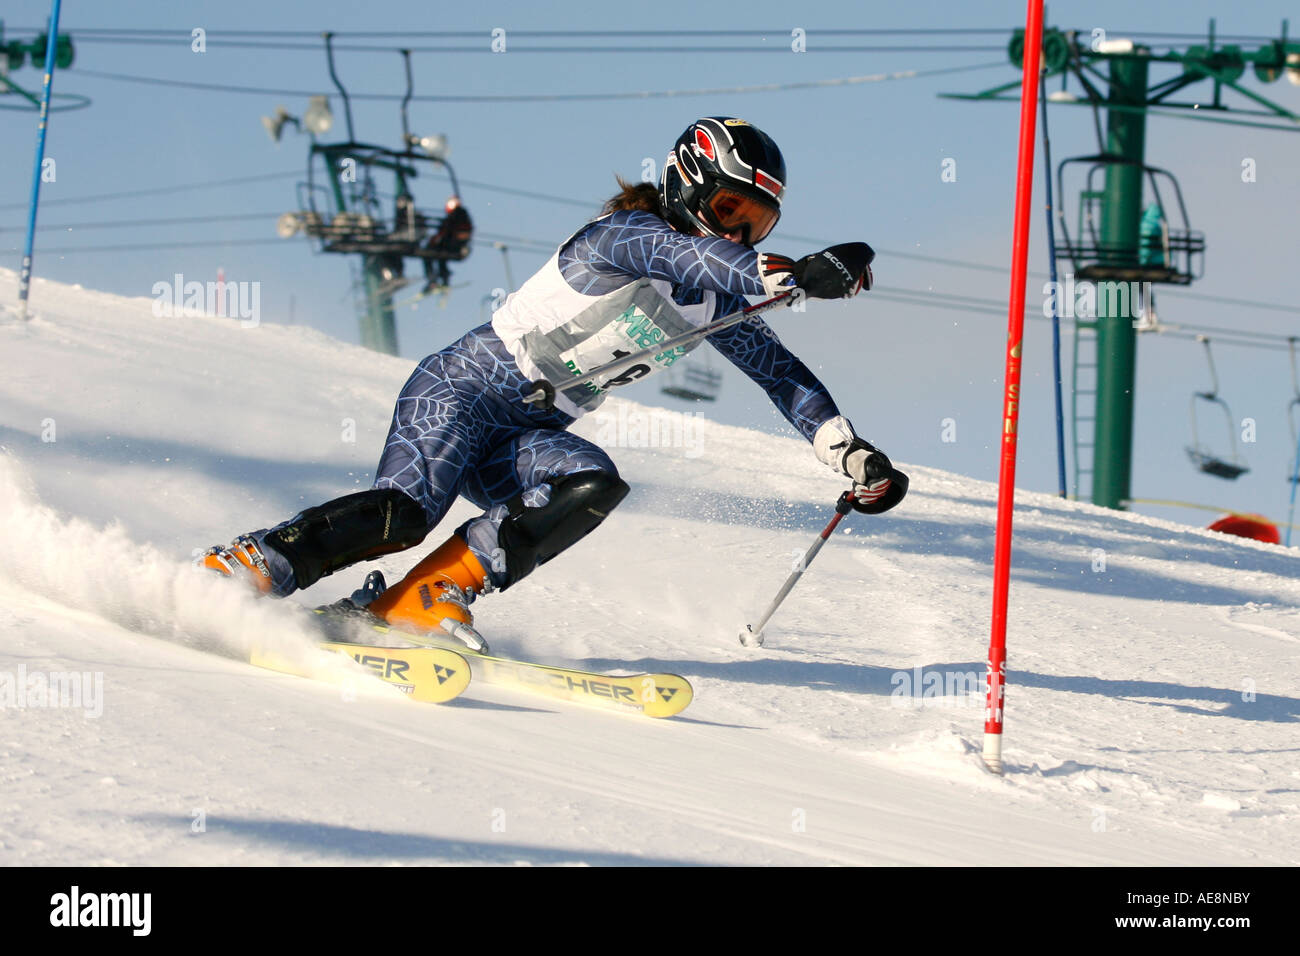 Girl approaching a gate in a ski race Stock Photo